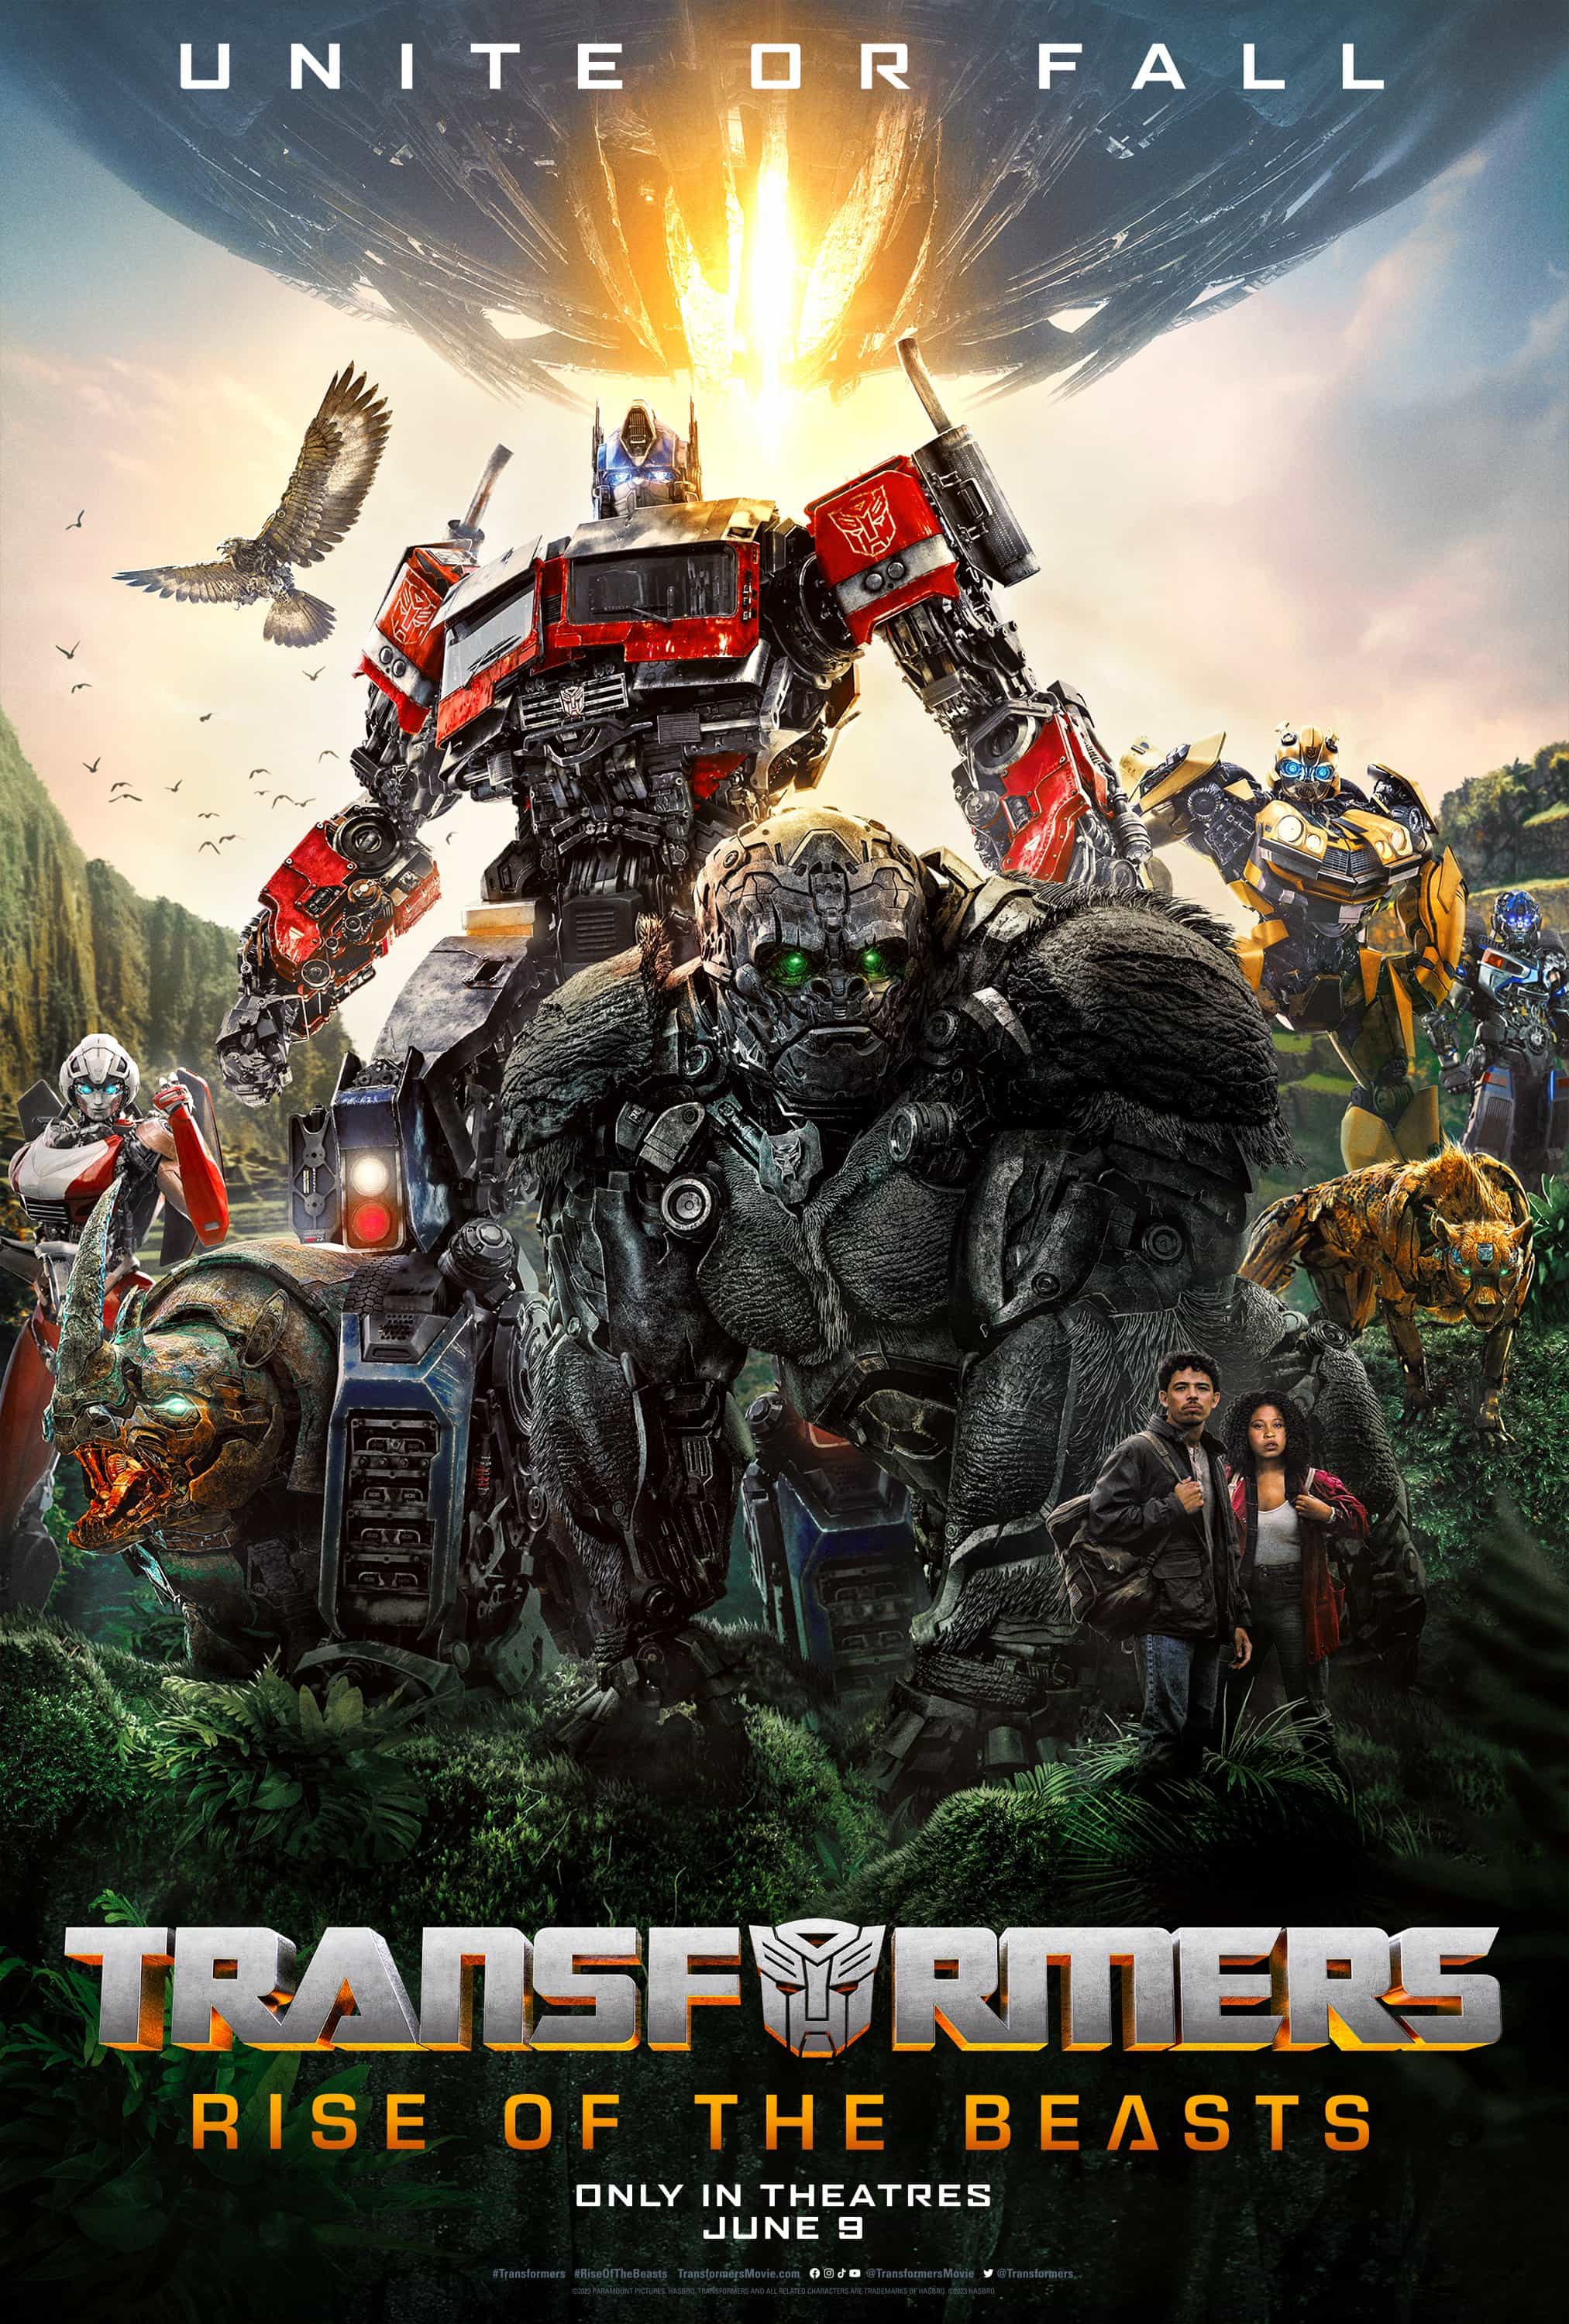 New trailer has been released for Transformers: Rise of the Beasts which stars Michelle Yeoh - movie UK release date 9th June 2023 #transformersriseofthebeasts